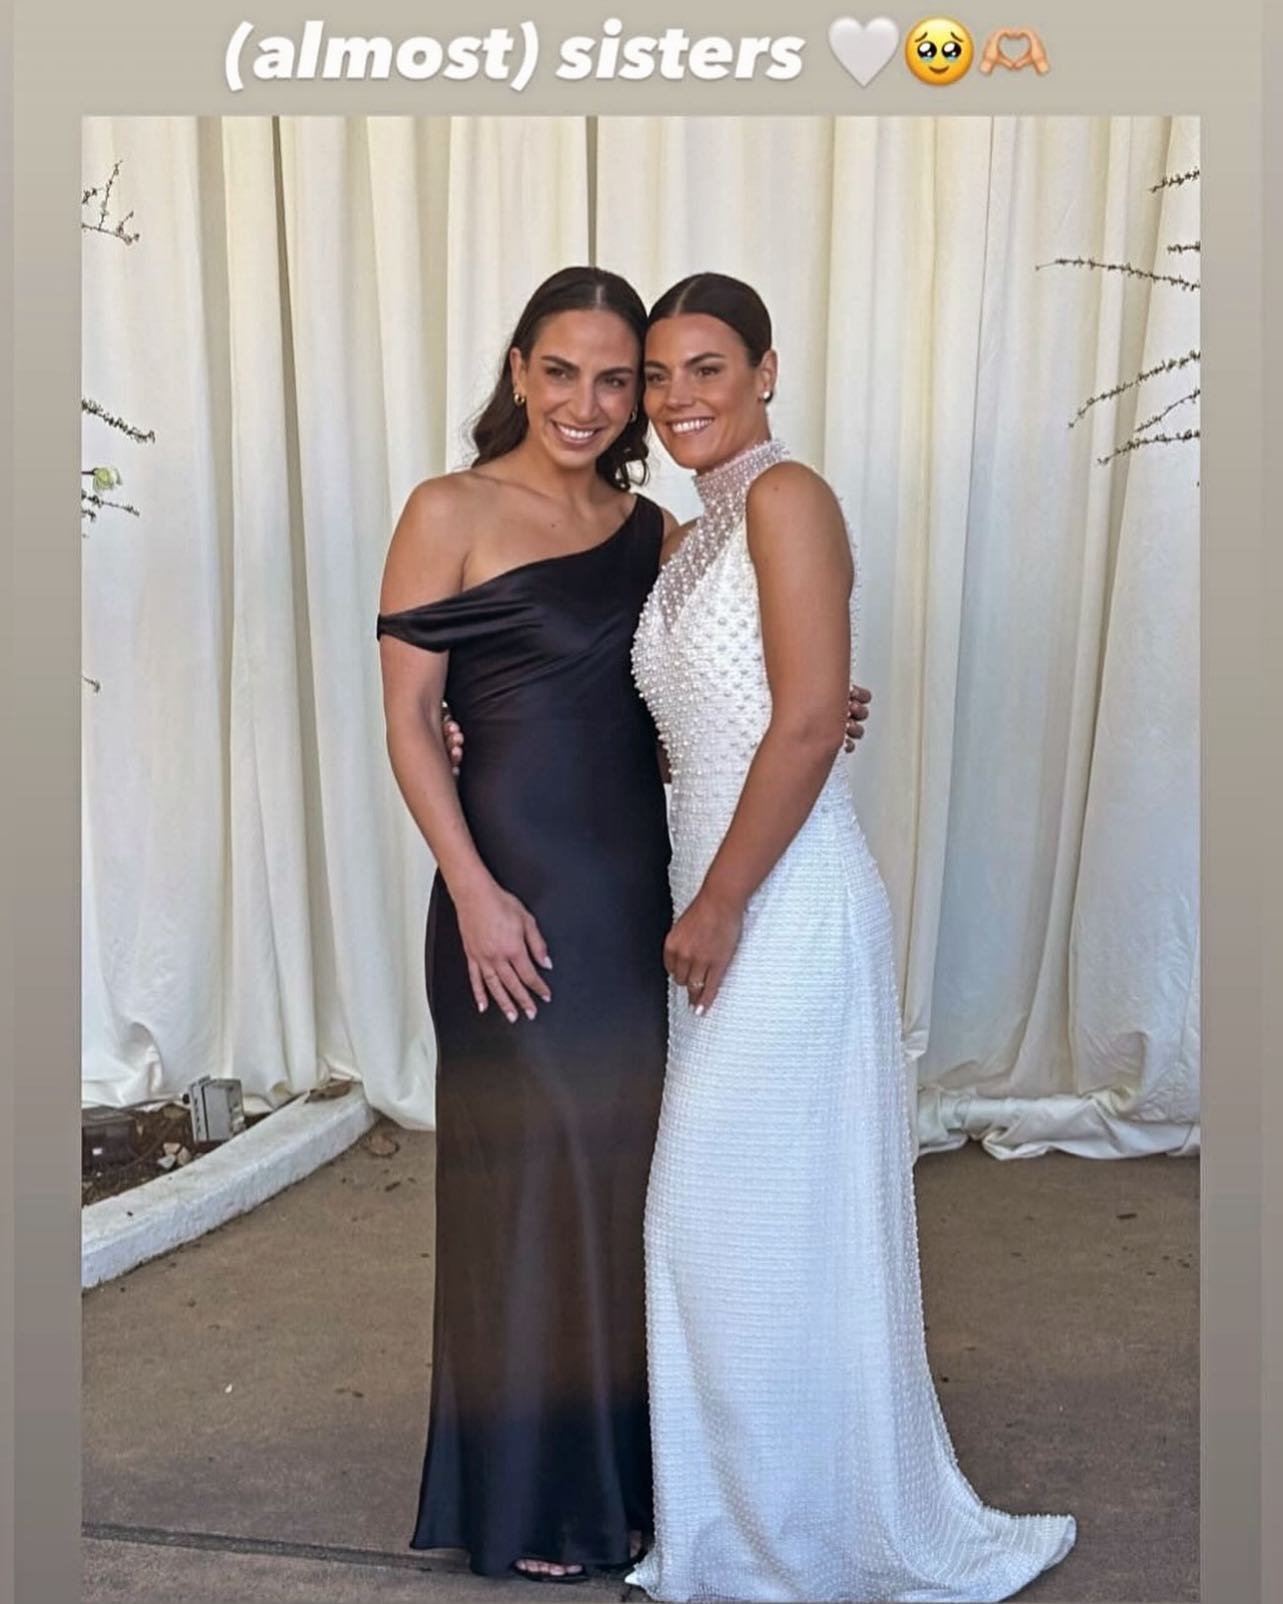 @thefakemarie (love your insta handle!) in her gorgeous bespoke wedding gown with her sister-in-law-to-be @mirandafaithcornejo ❤️
Collaborating with Marie, to design and create her dream gown, was such a pleasure! Stay turned for more photos to come!